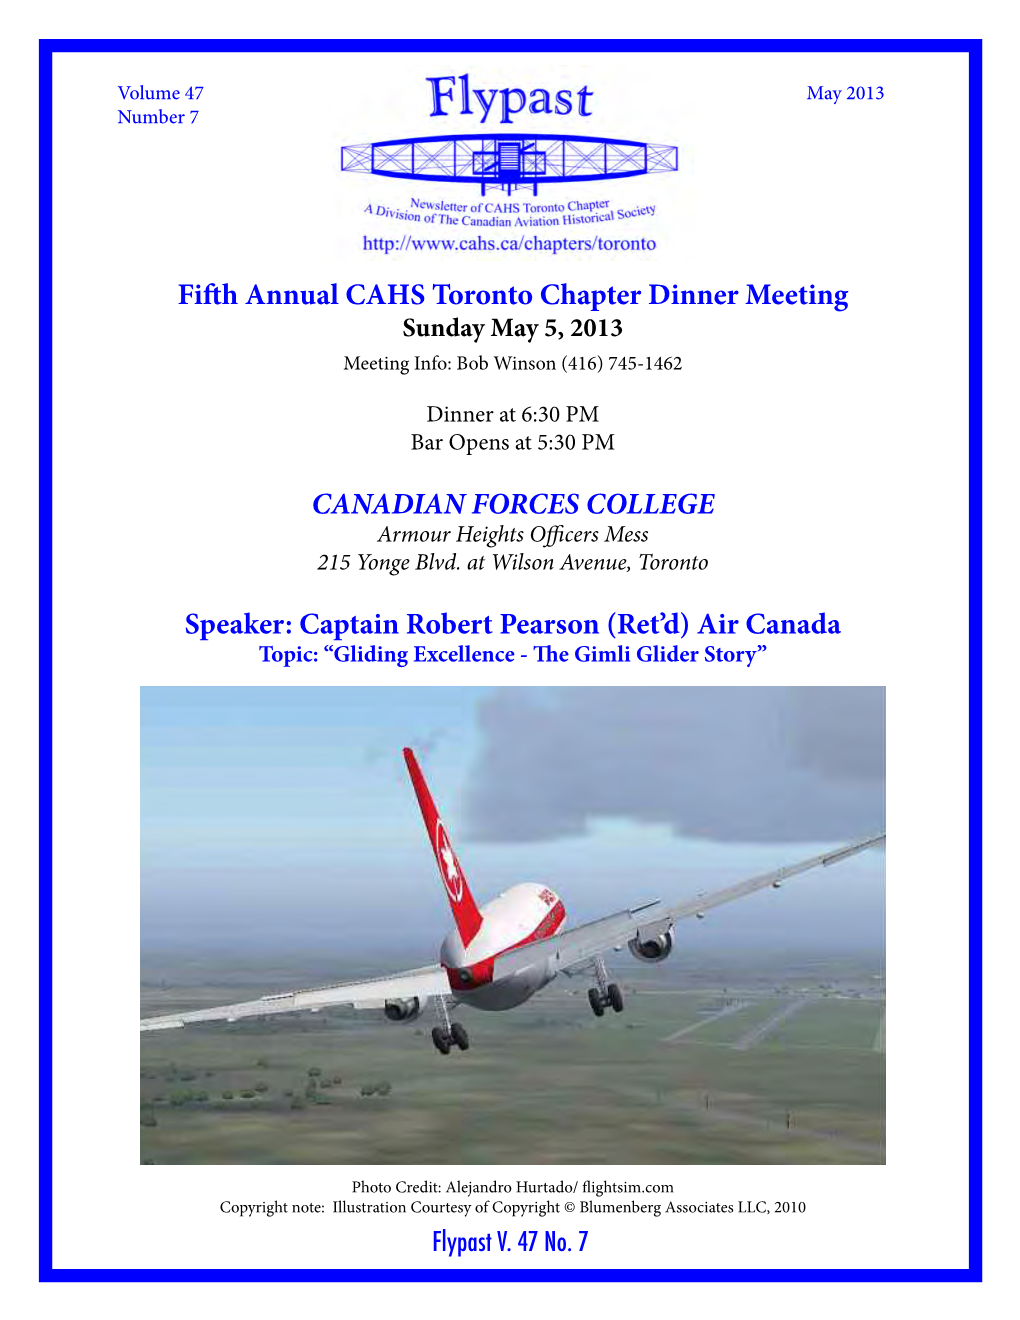 Air Canada Topic: “Gliding Excellence - the Gimli Glider Story”